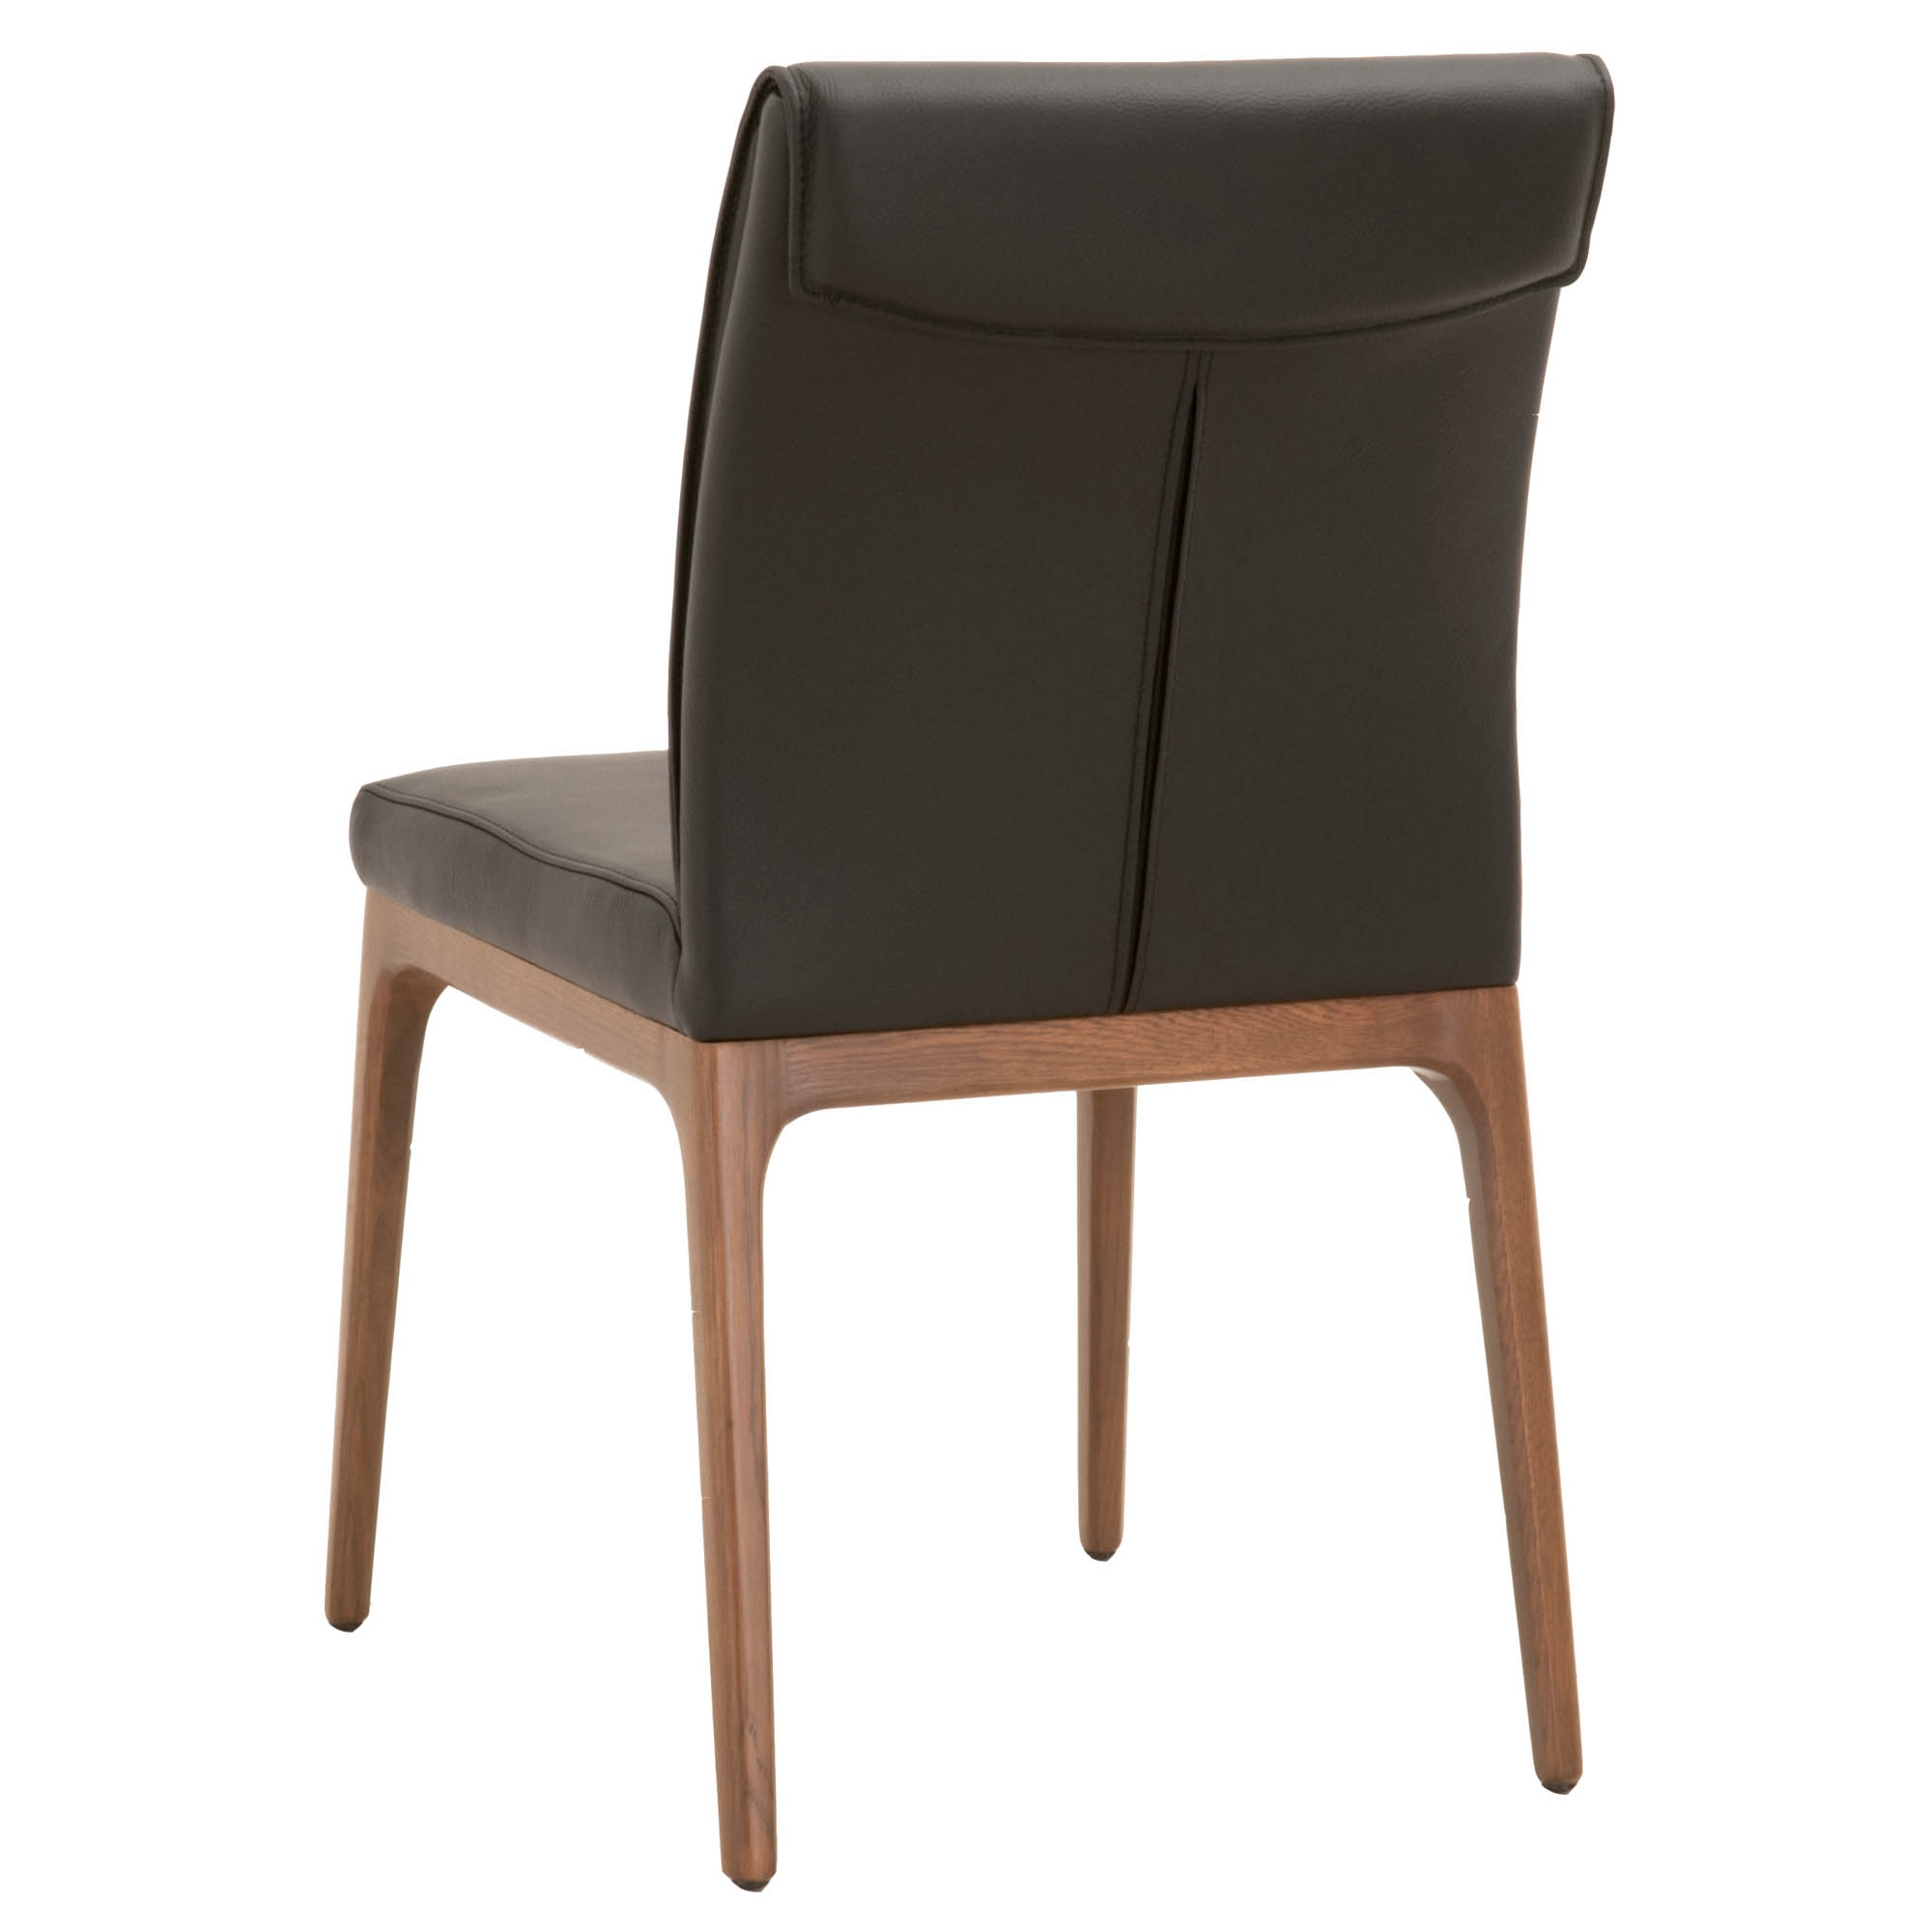 Alex Dining Chair, Sable Top Grain Leather, Set of 2 - Image 3